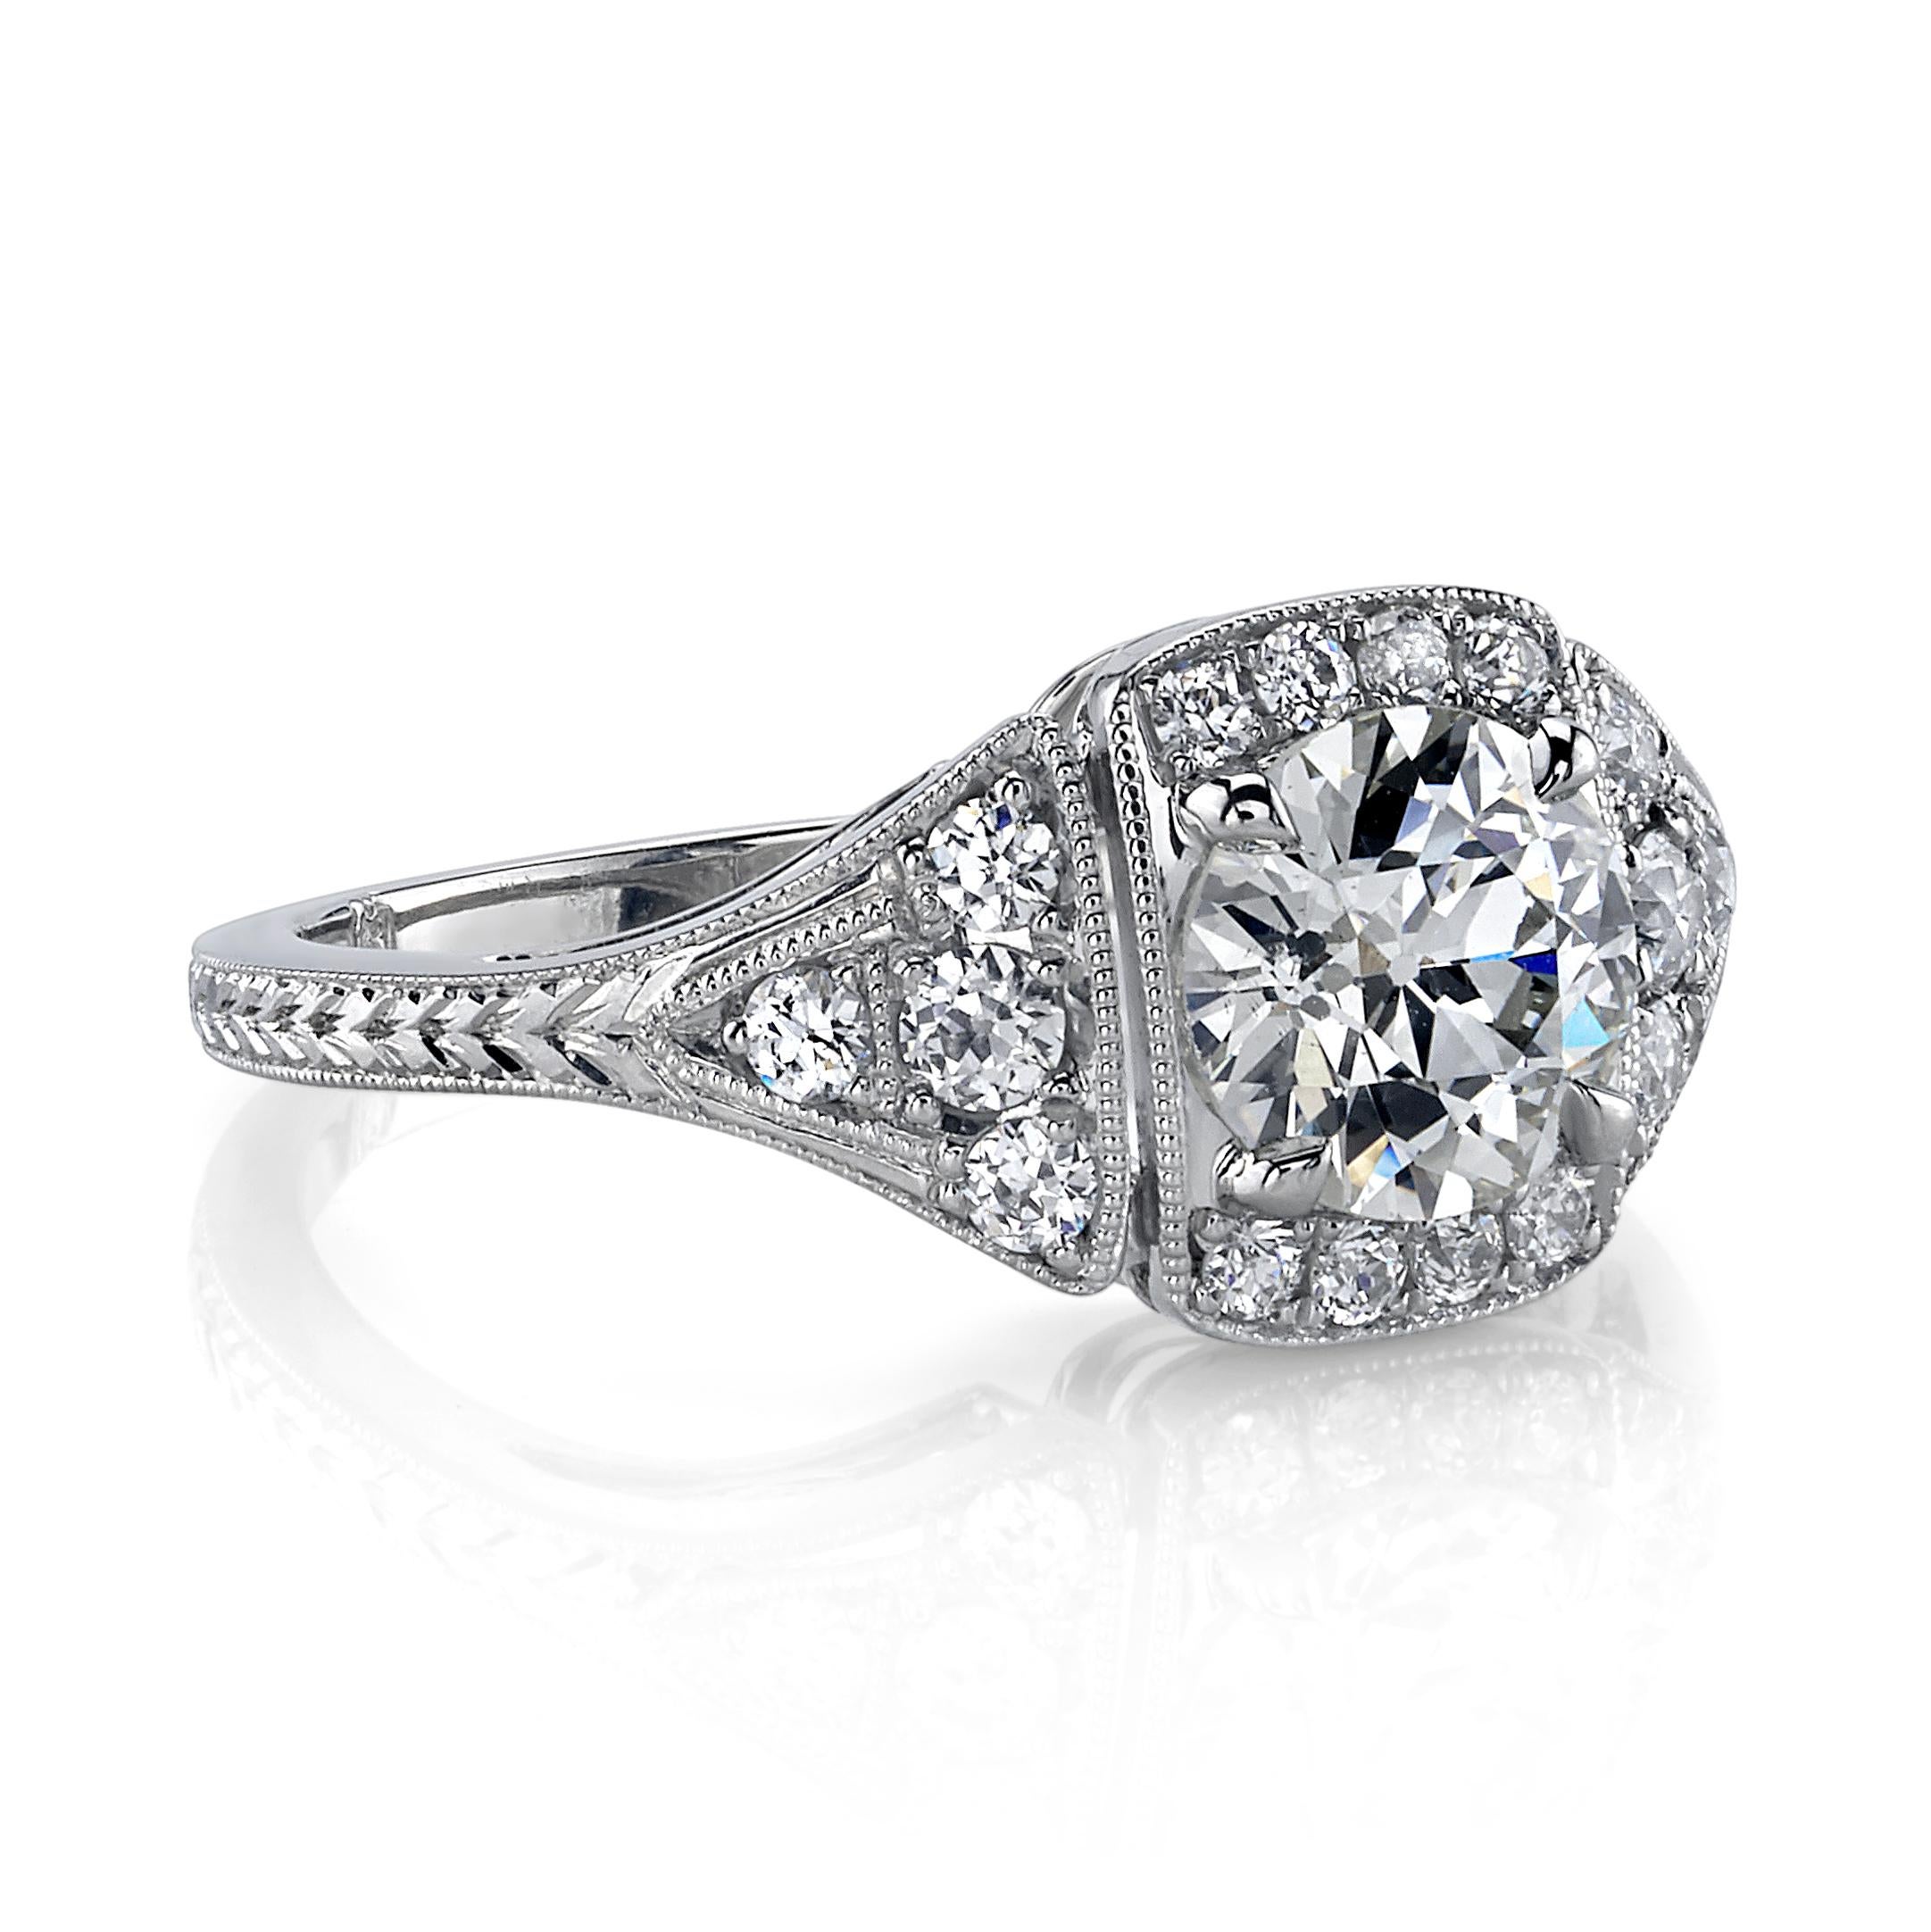 1.09ct K/SI1 GIA certified old European cut diamond with 0.35ctw diamond accents set in a handcrafted platinum mounting. 

Ring is currently a size 6 and can be sized to fit.  